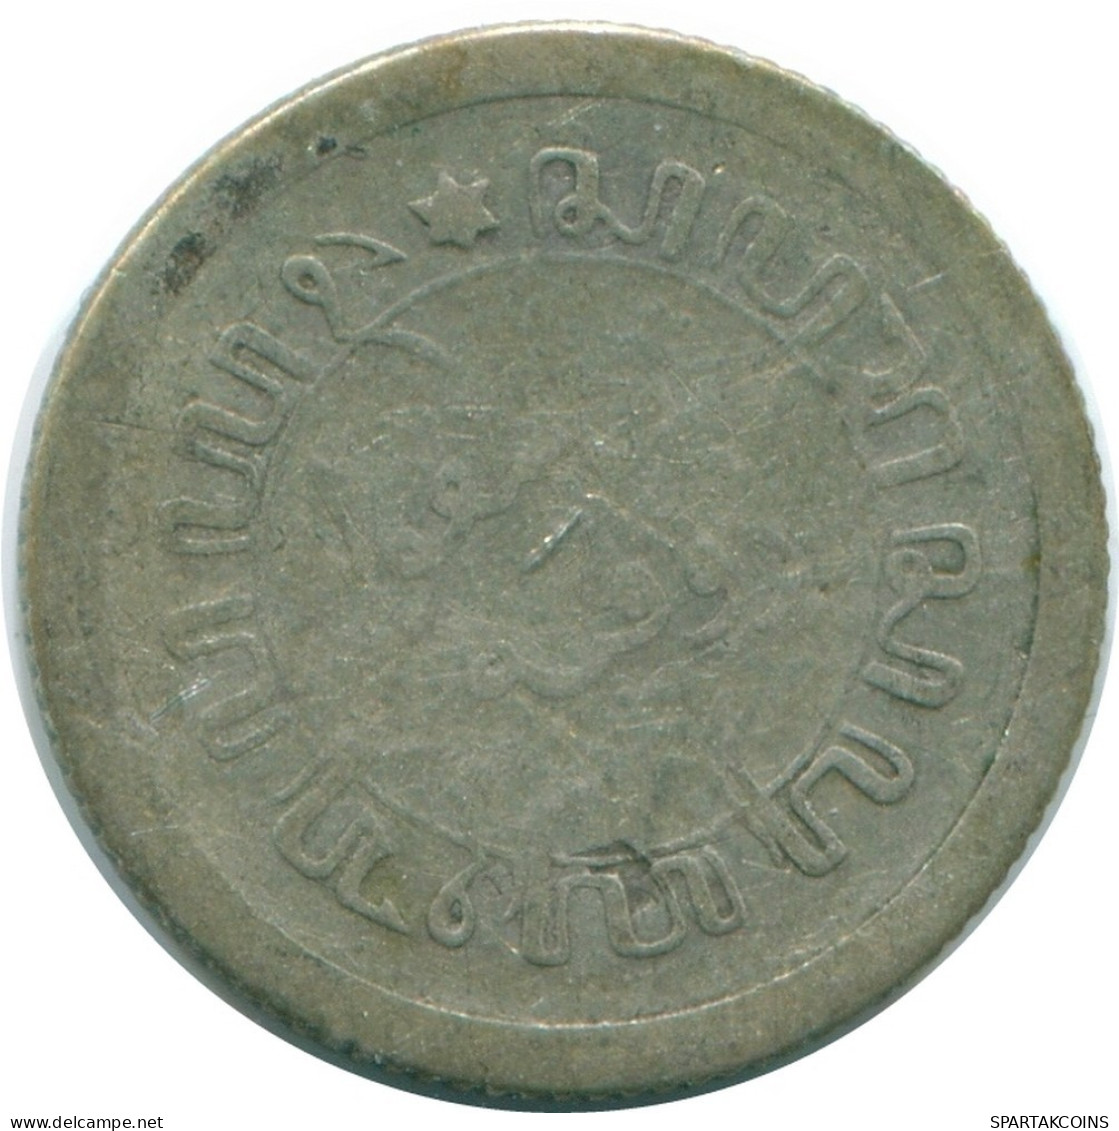 1/10 GULDEN 1912 NETHERLANDS EAST INDIES SILVER Colonial Coin #NL13264.3.U.A - Indes Neerlandesas